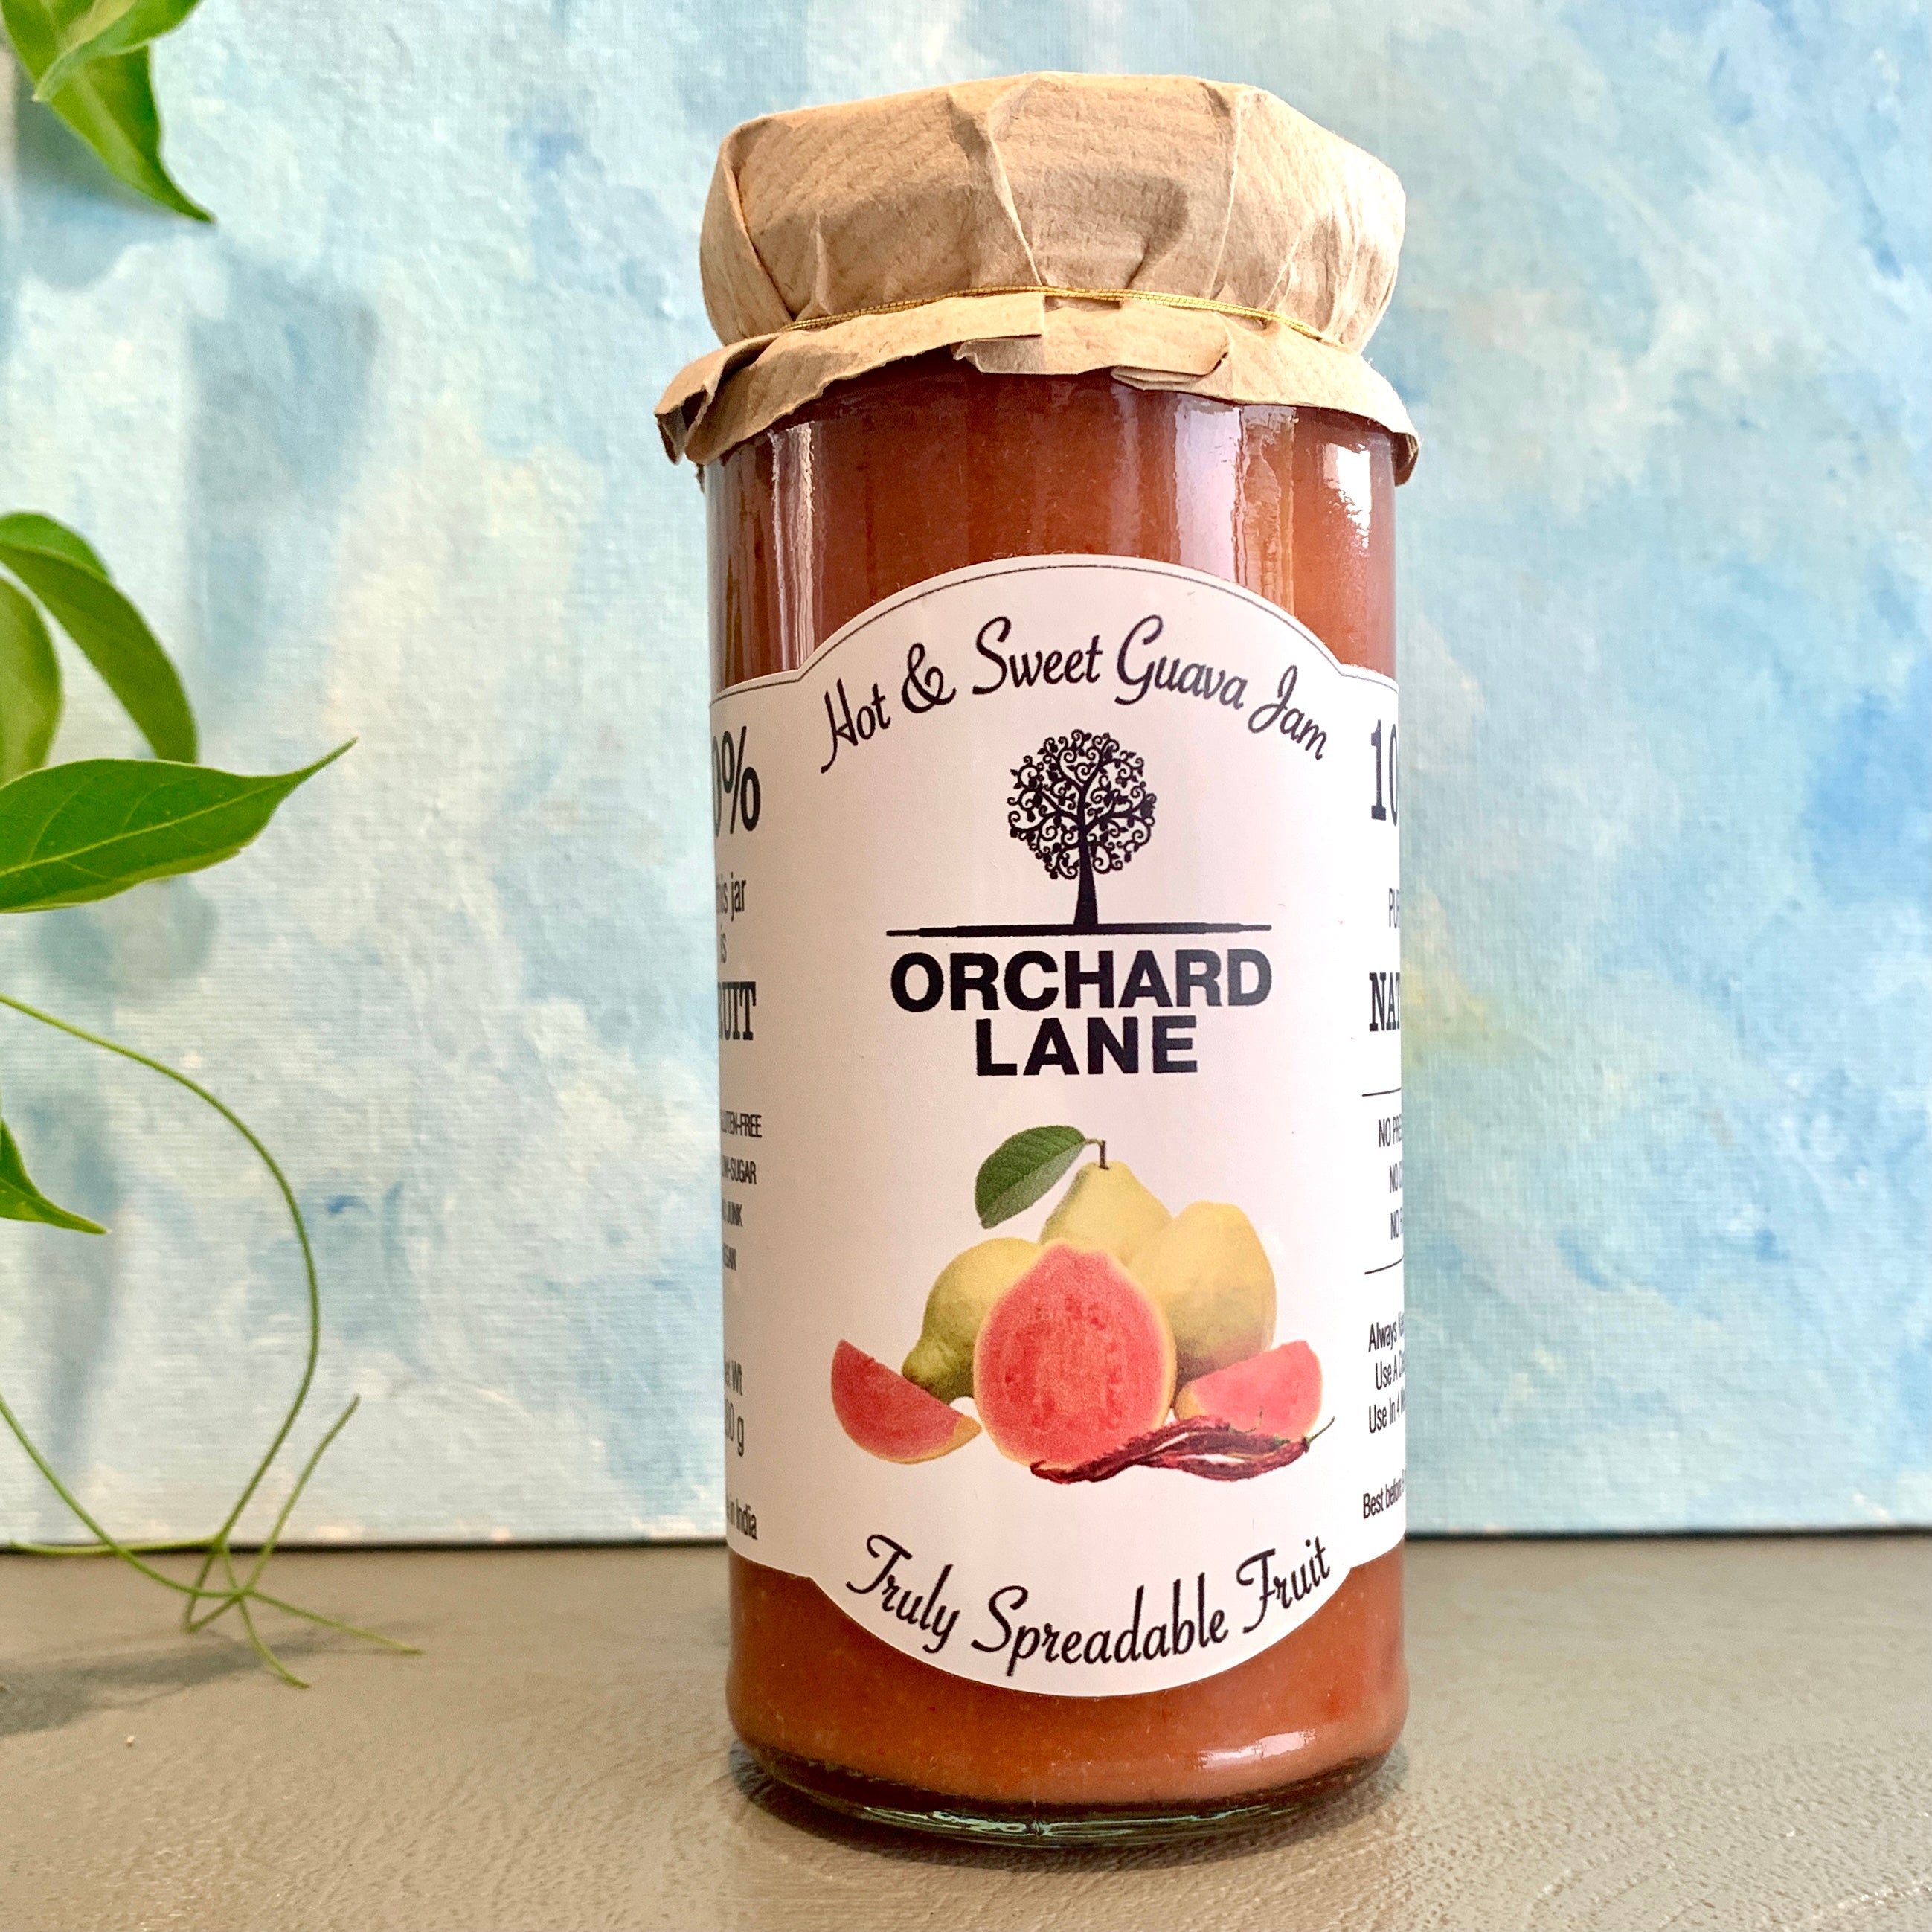 Hot and Sweet Guava Jam